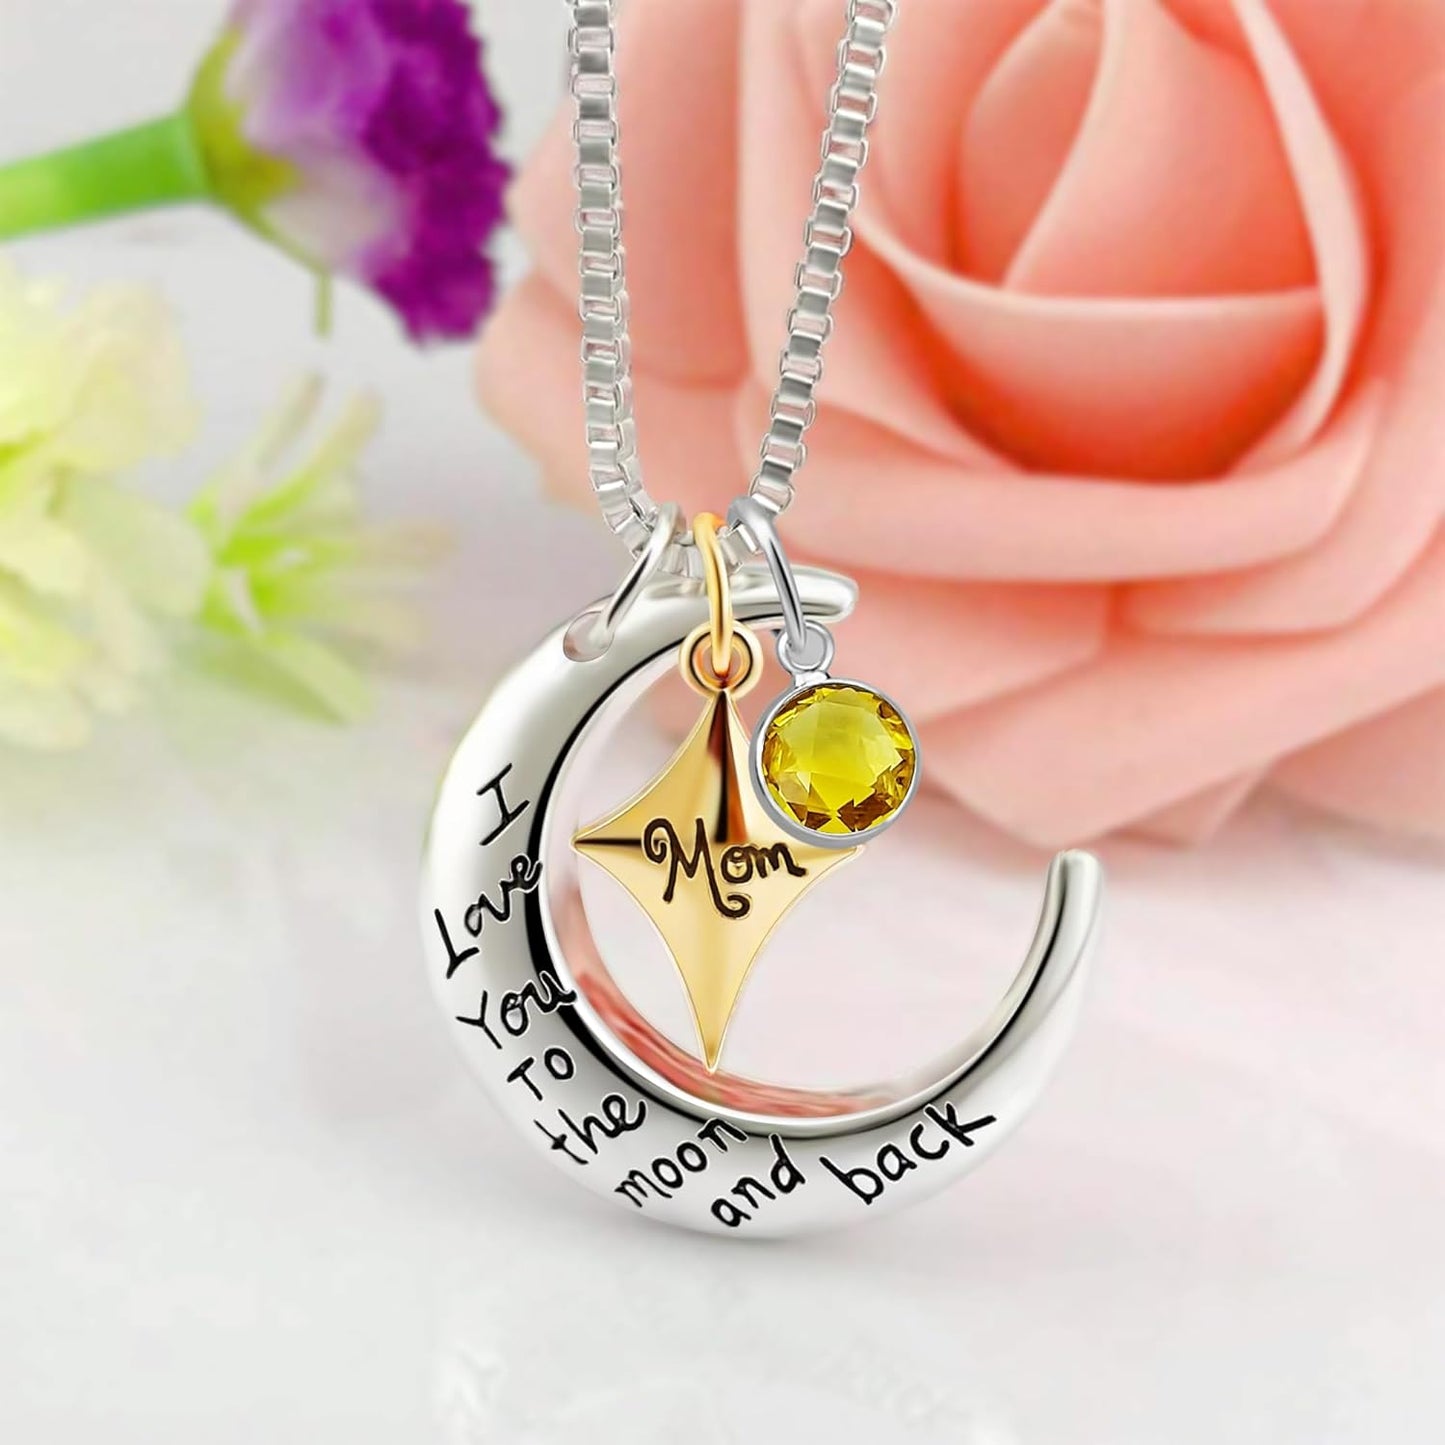 Moon Star Pendant Necklace I Love You to The Moon and Back